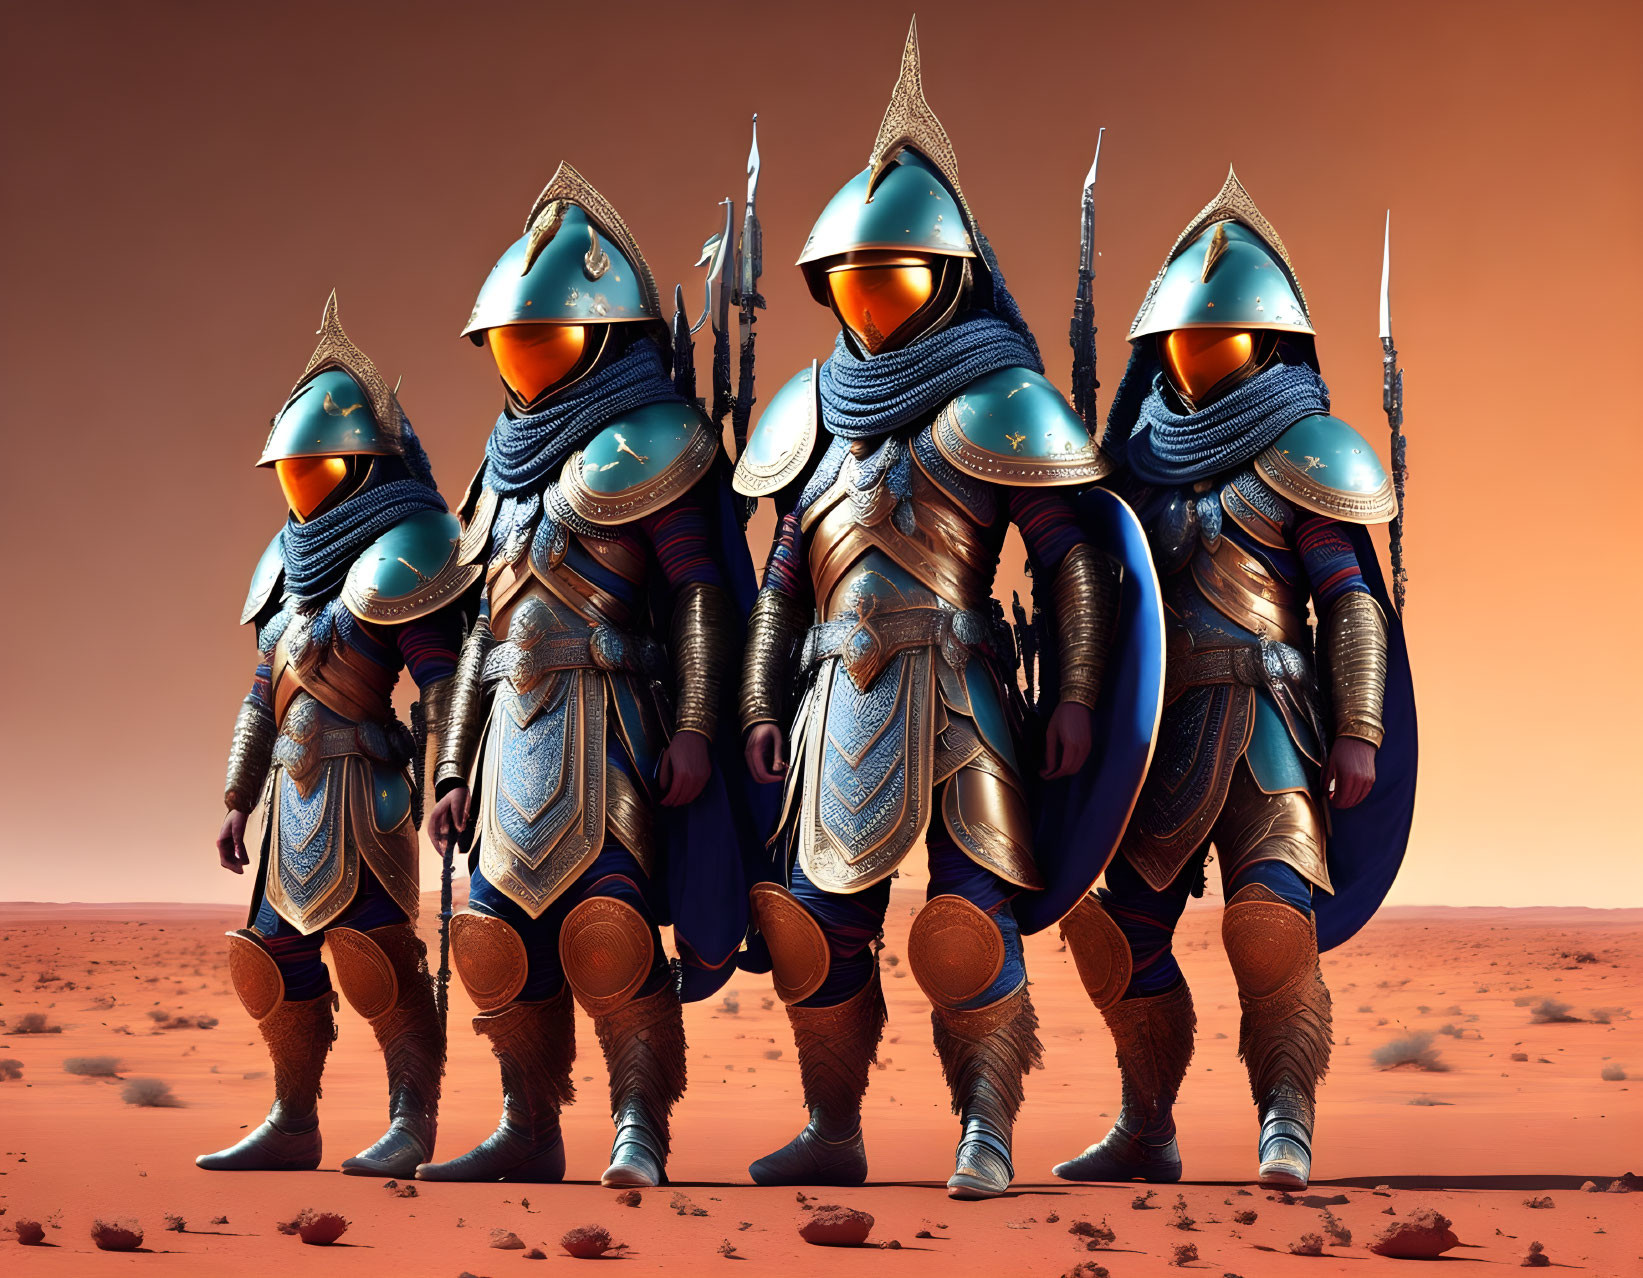 Four armored warriors in blue and silver armor with spears in a desert landscape